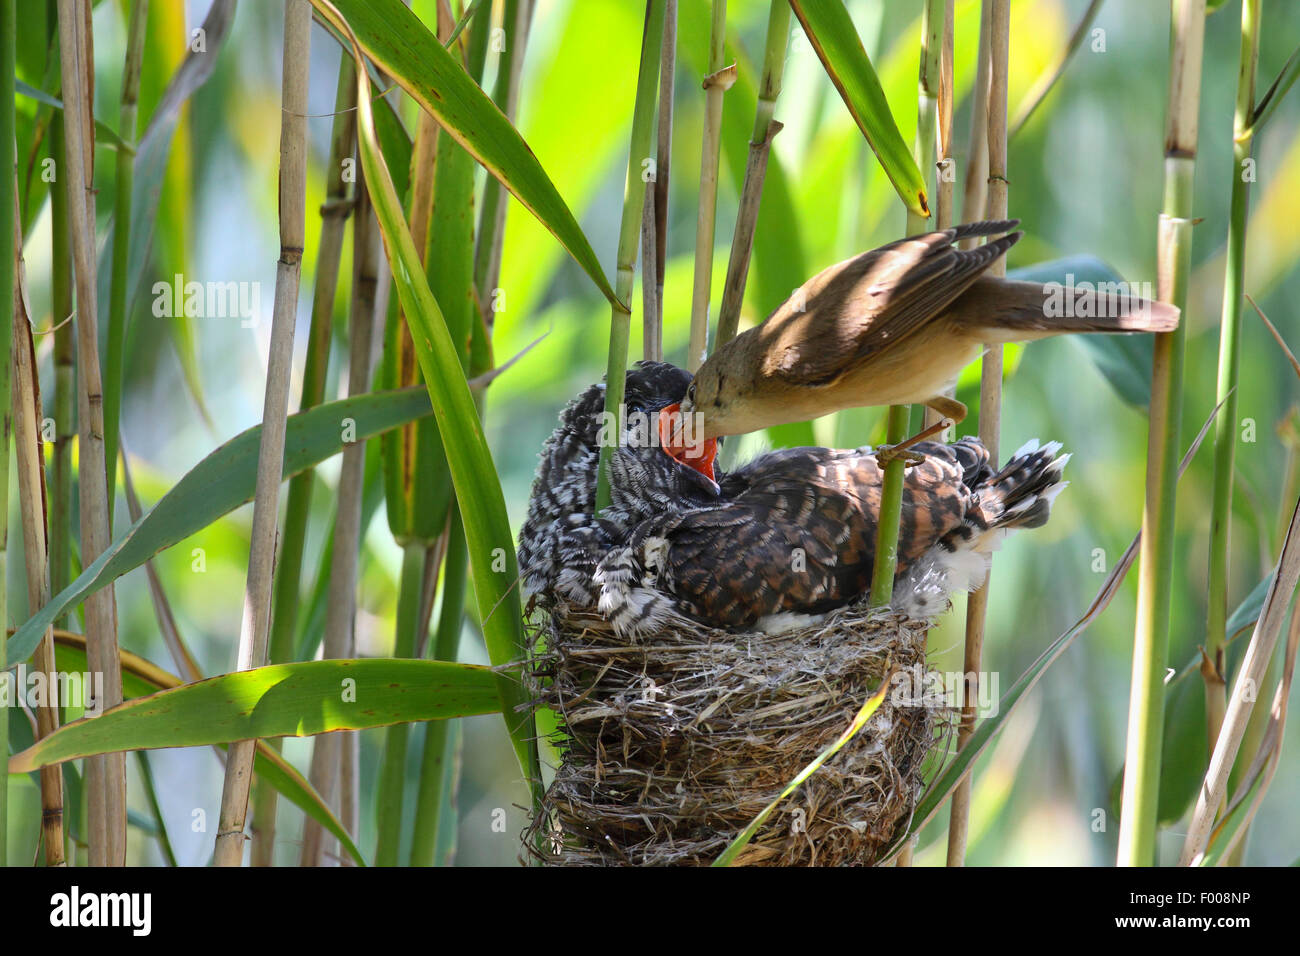 Eurasian cuckoo (Cuculus canorus), fledgling in the nest of a reed warbler, reed warbler feeding the cuckoo chick, Germany Stock Photo